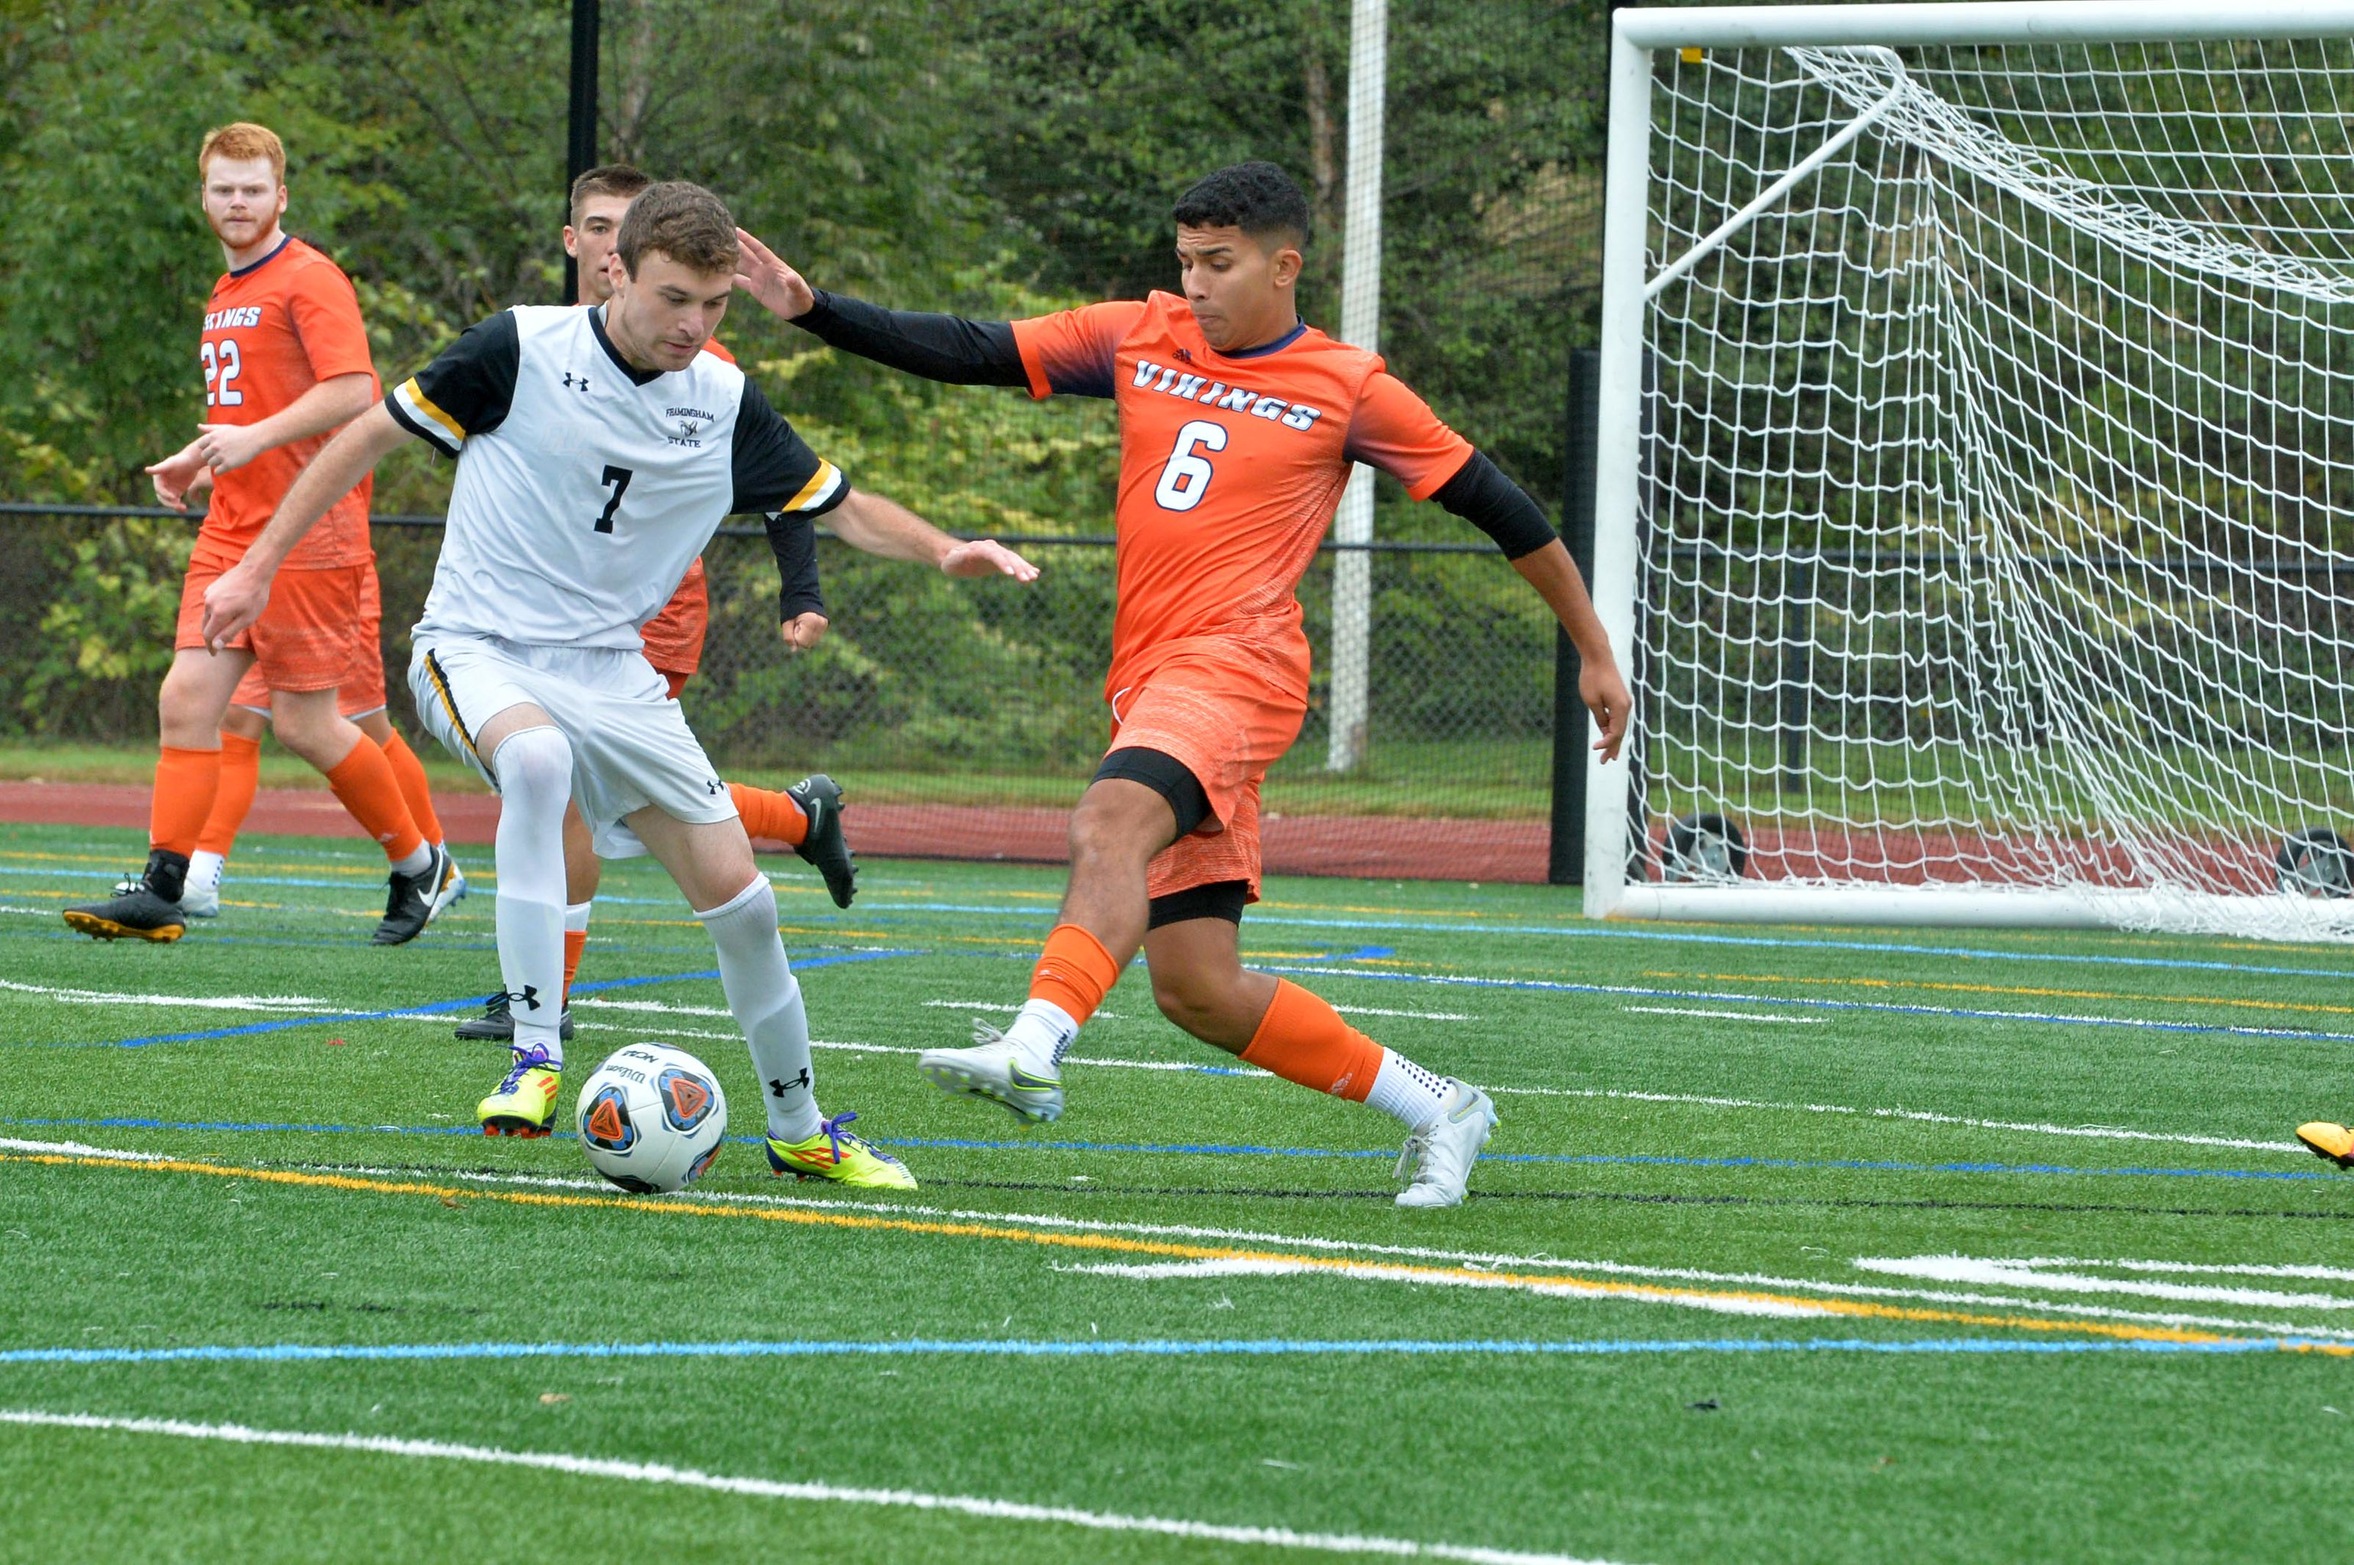 Vikings End Regular Season With 1-0 Win Over Westfield State